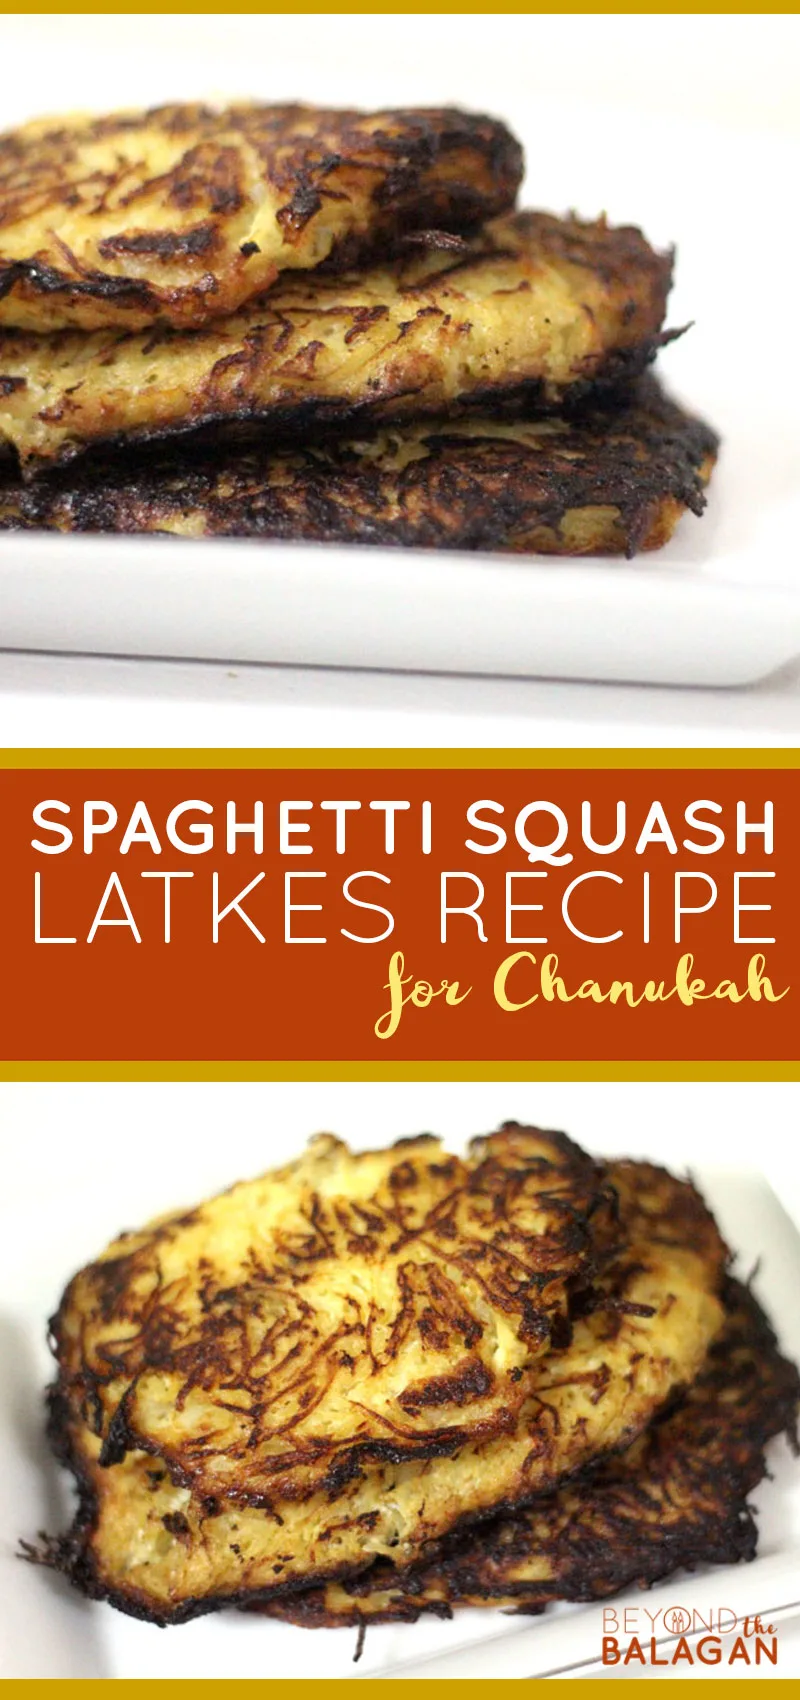 Click for the recipe to make these delicious spaghetti squash latkes recipe for Chanukah or Hanukkah. this is a great way to celebrate Chanukah with kids and perfect traditional latkes recipe for a family Hannukah party. 